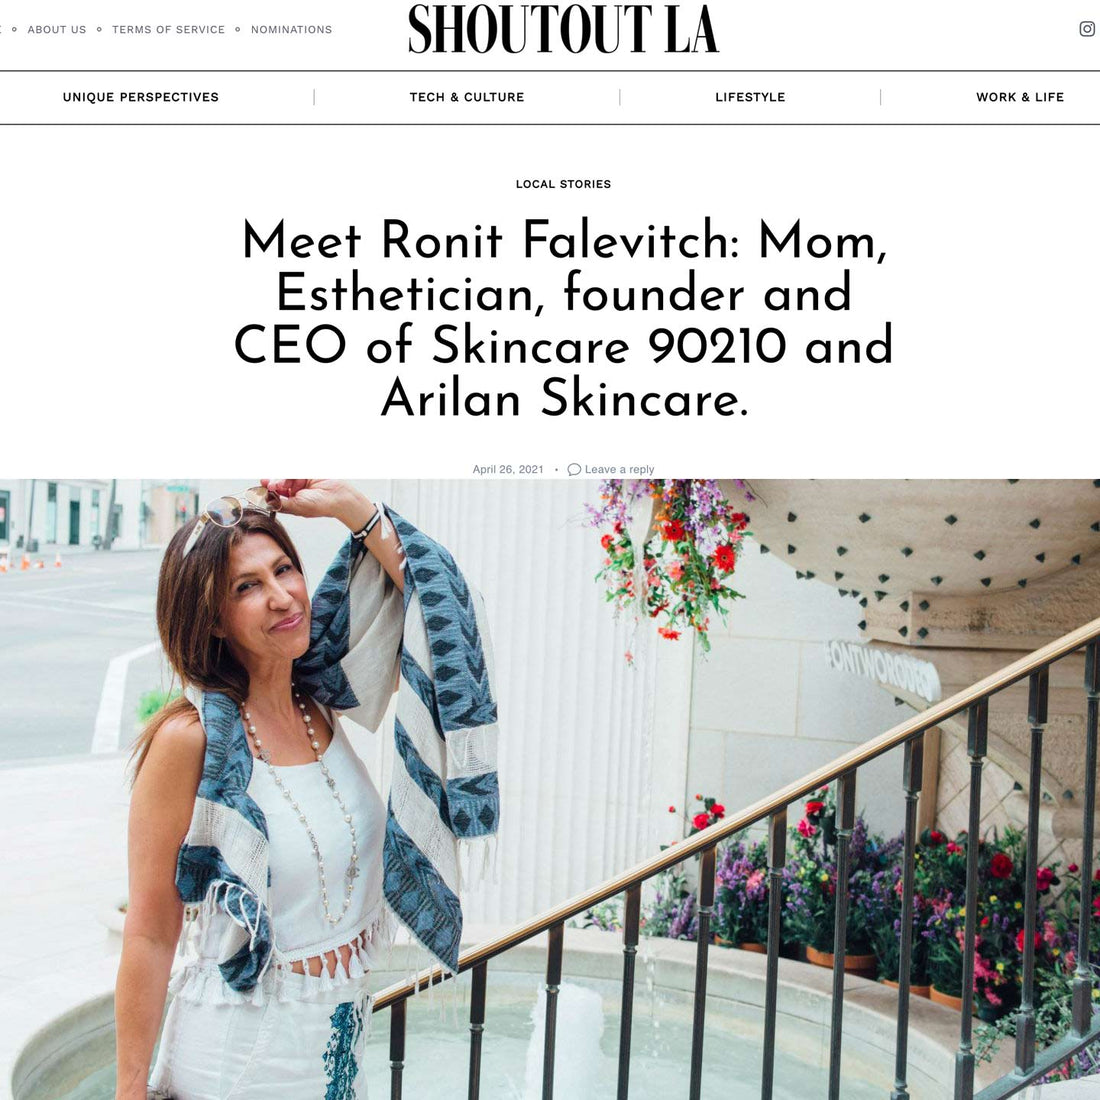 SHOUTOUT LA Meet Ronit Falevitch: Mom, Esthetician, founder and CEO of Skincare 90210 and Arilan Skincare.